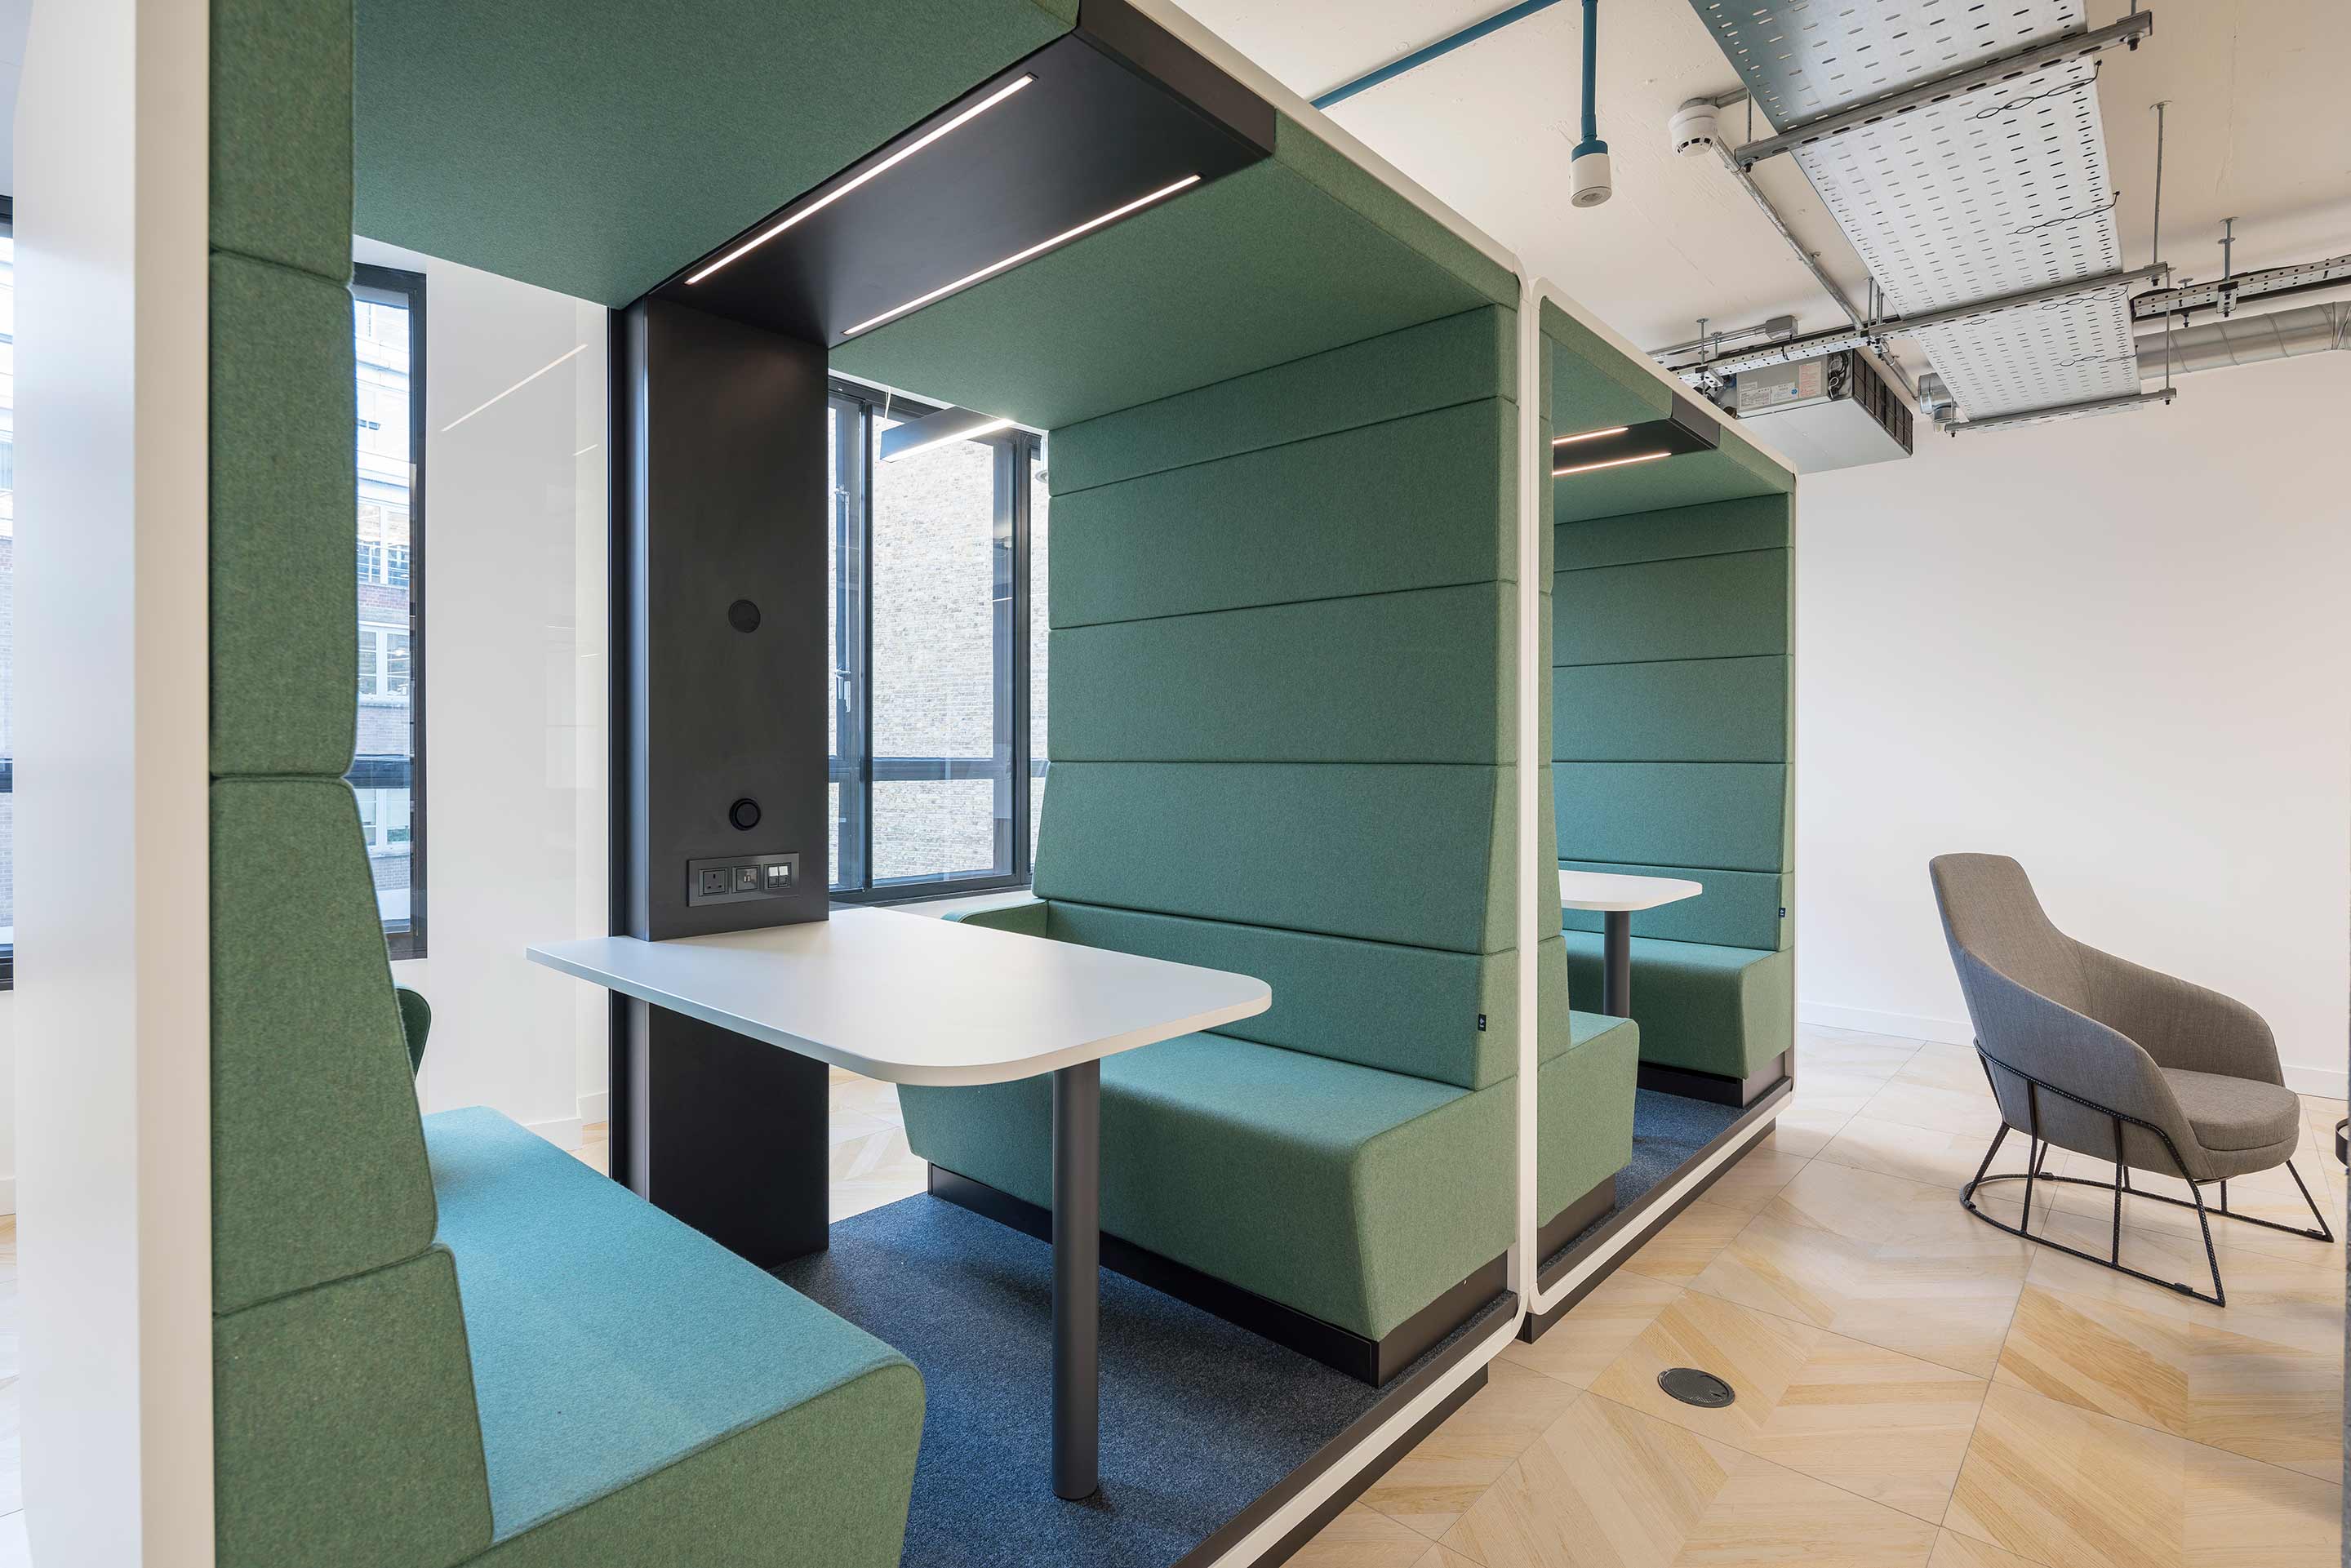 Collaboration and meeting booths for Farringdon Point